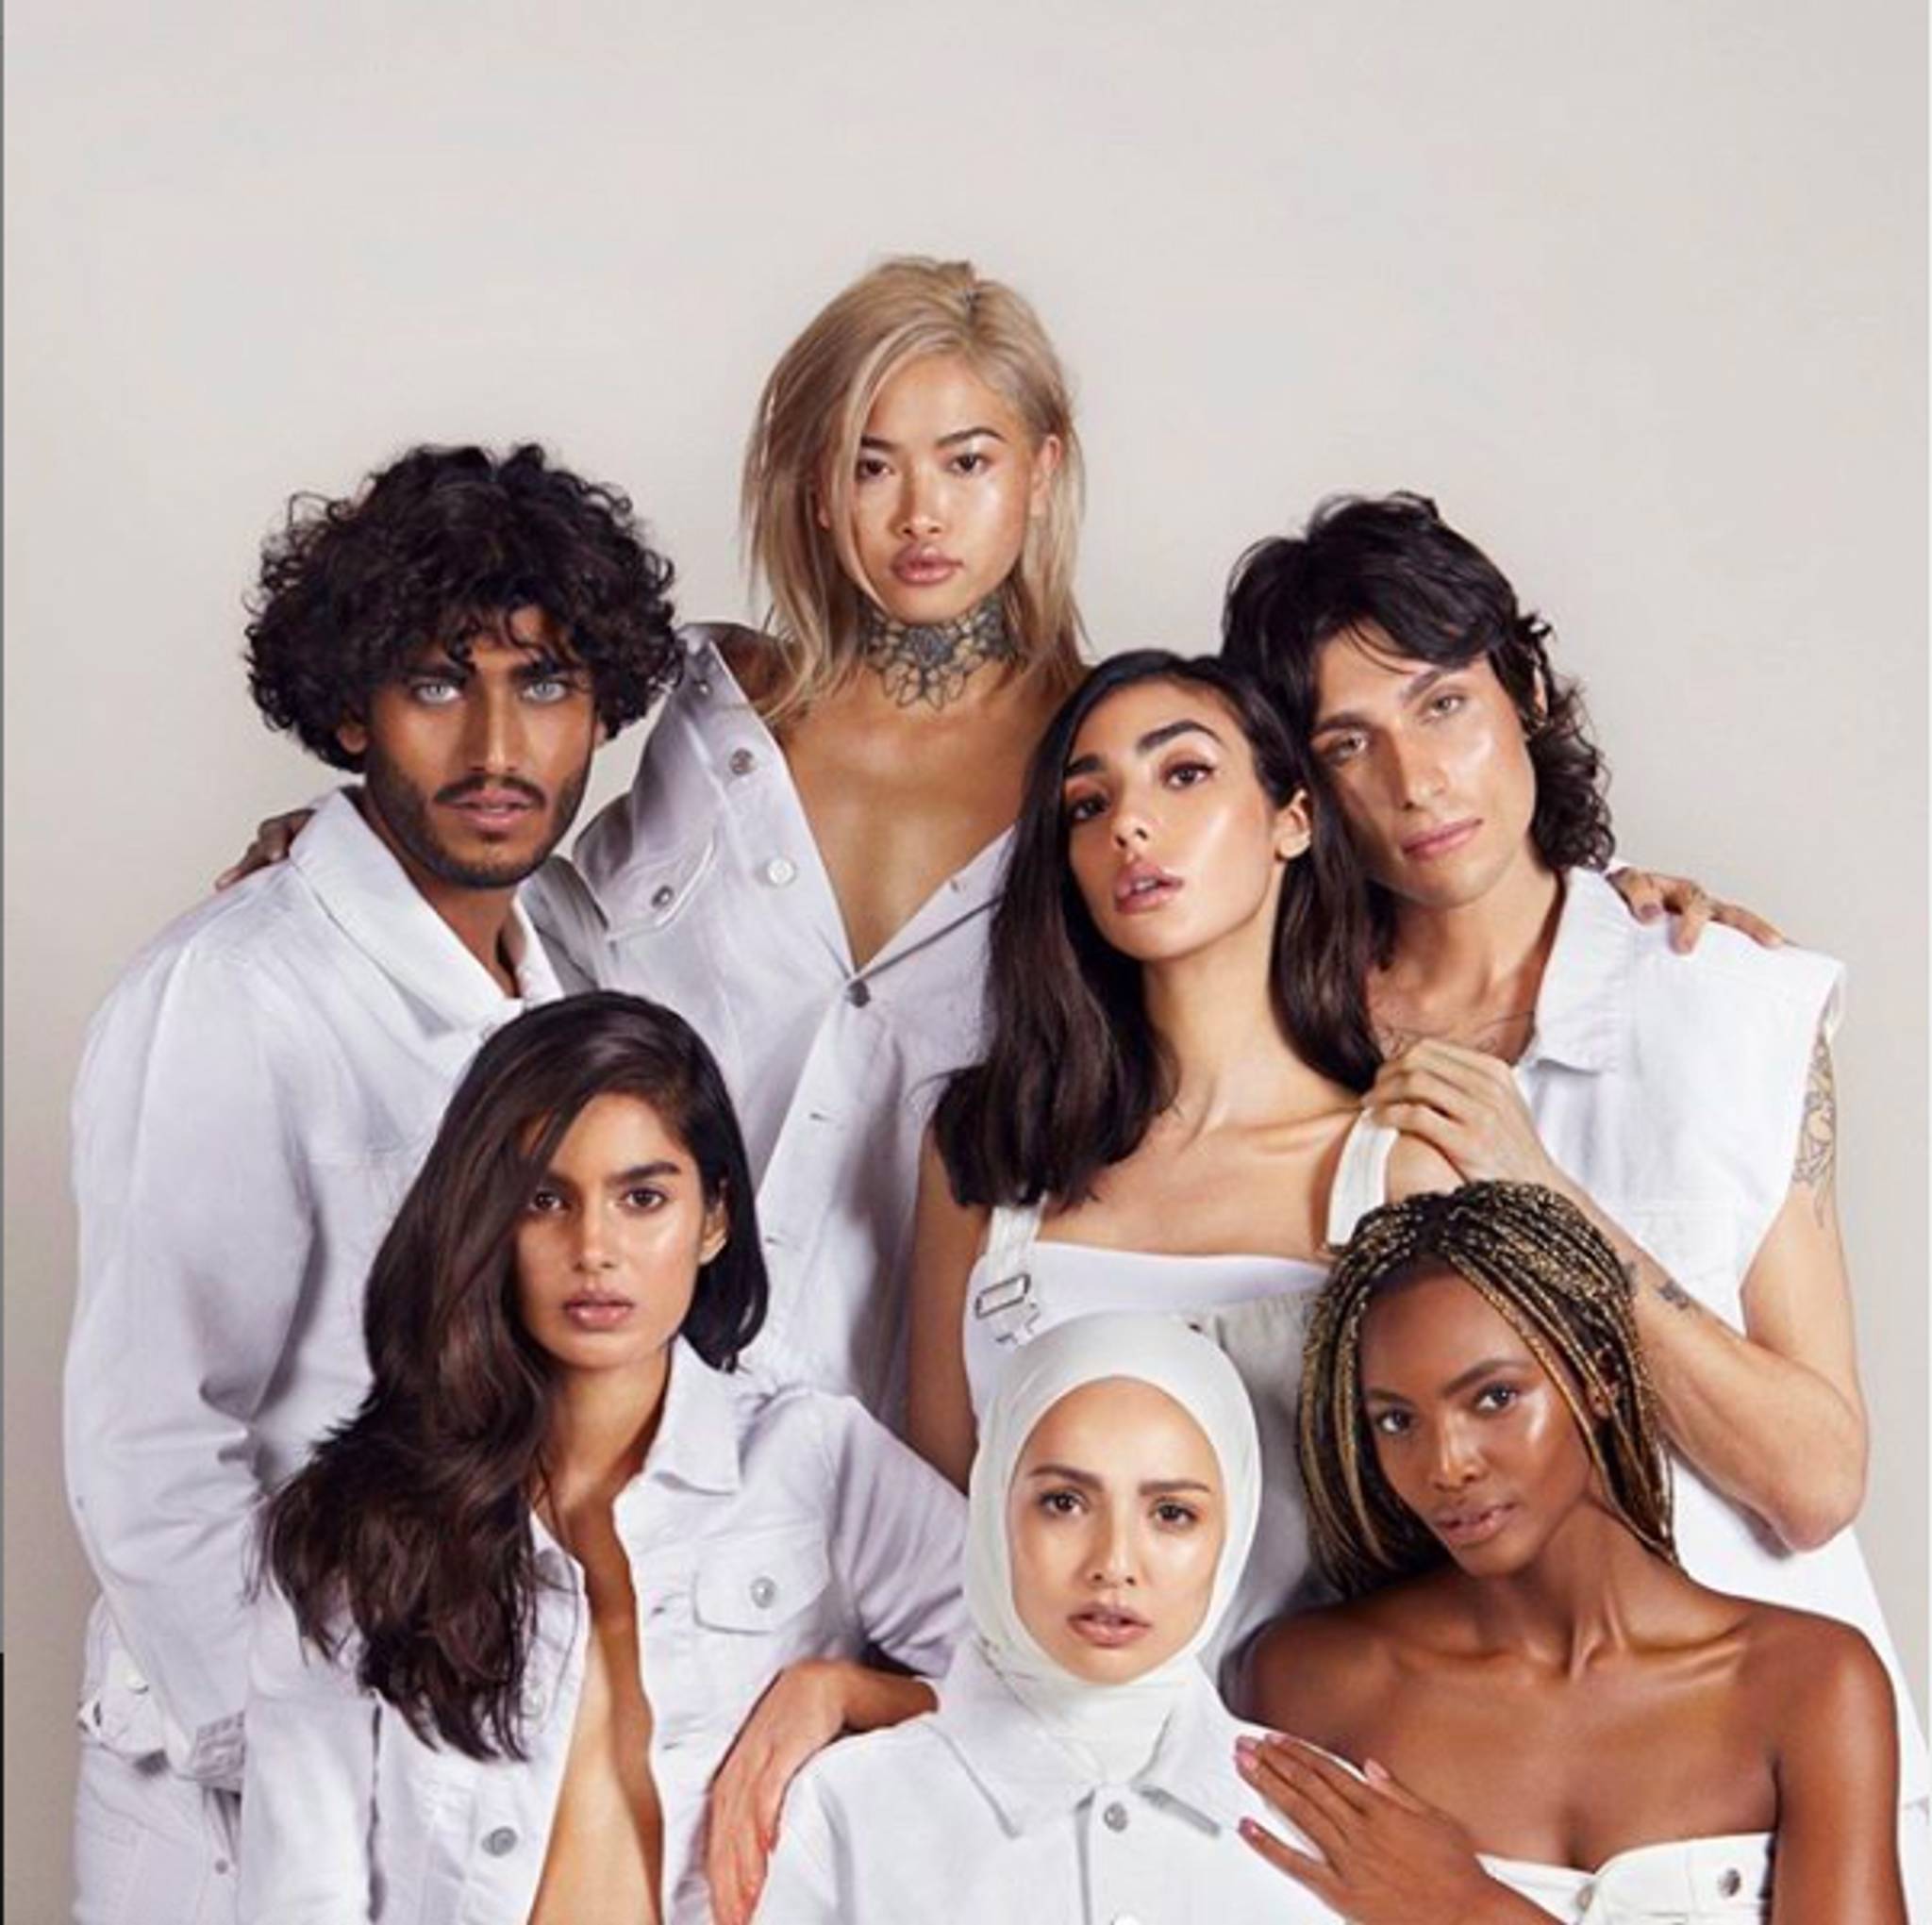 CTZN Cosmetics champions diversity with 25 nude shades